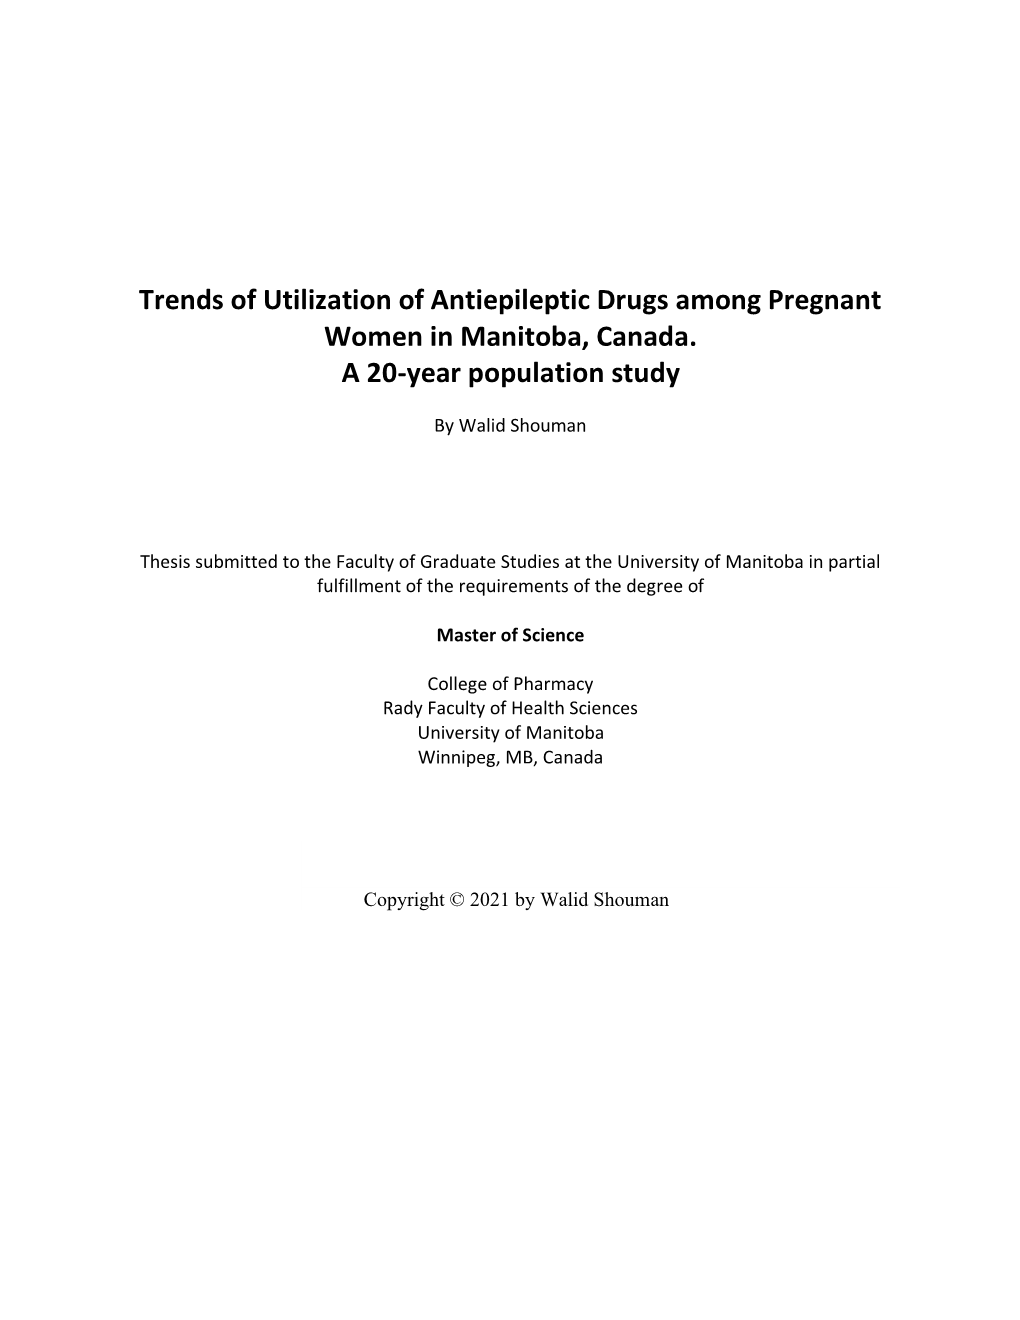 Trends of Utilization of Antiepileptic Drugs Among Pregnant Women in Manitoba, Canada